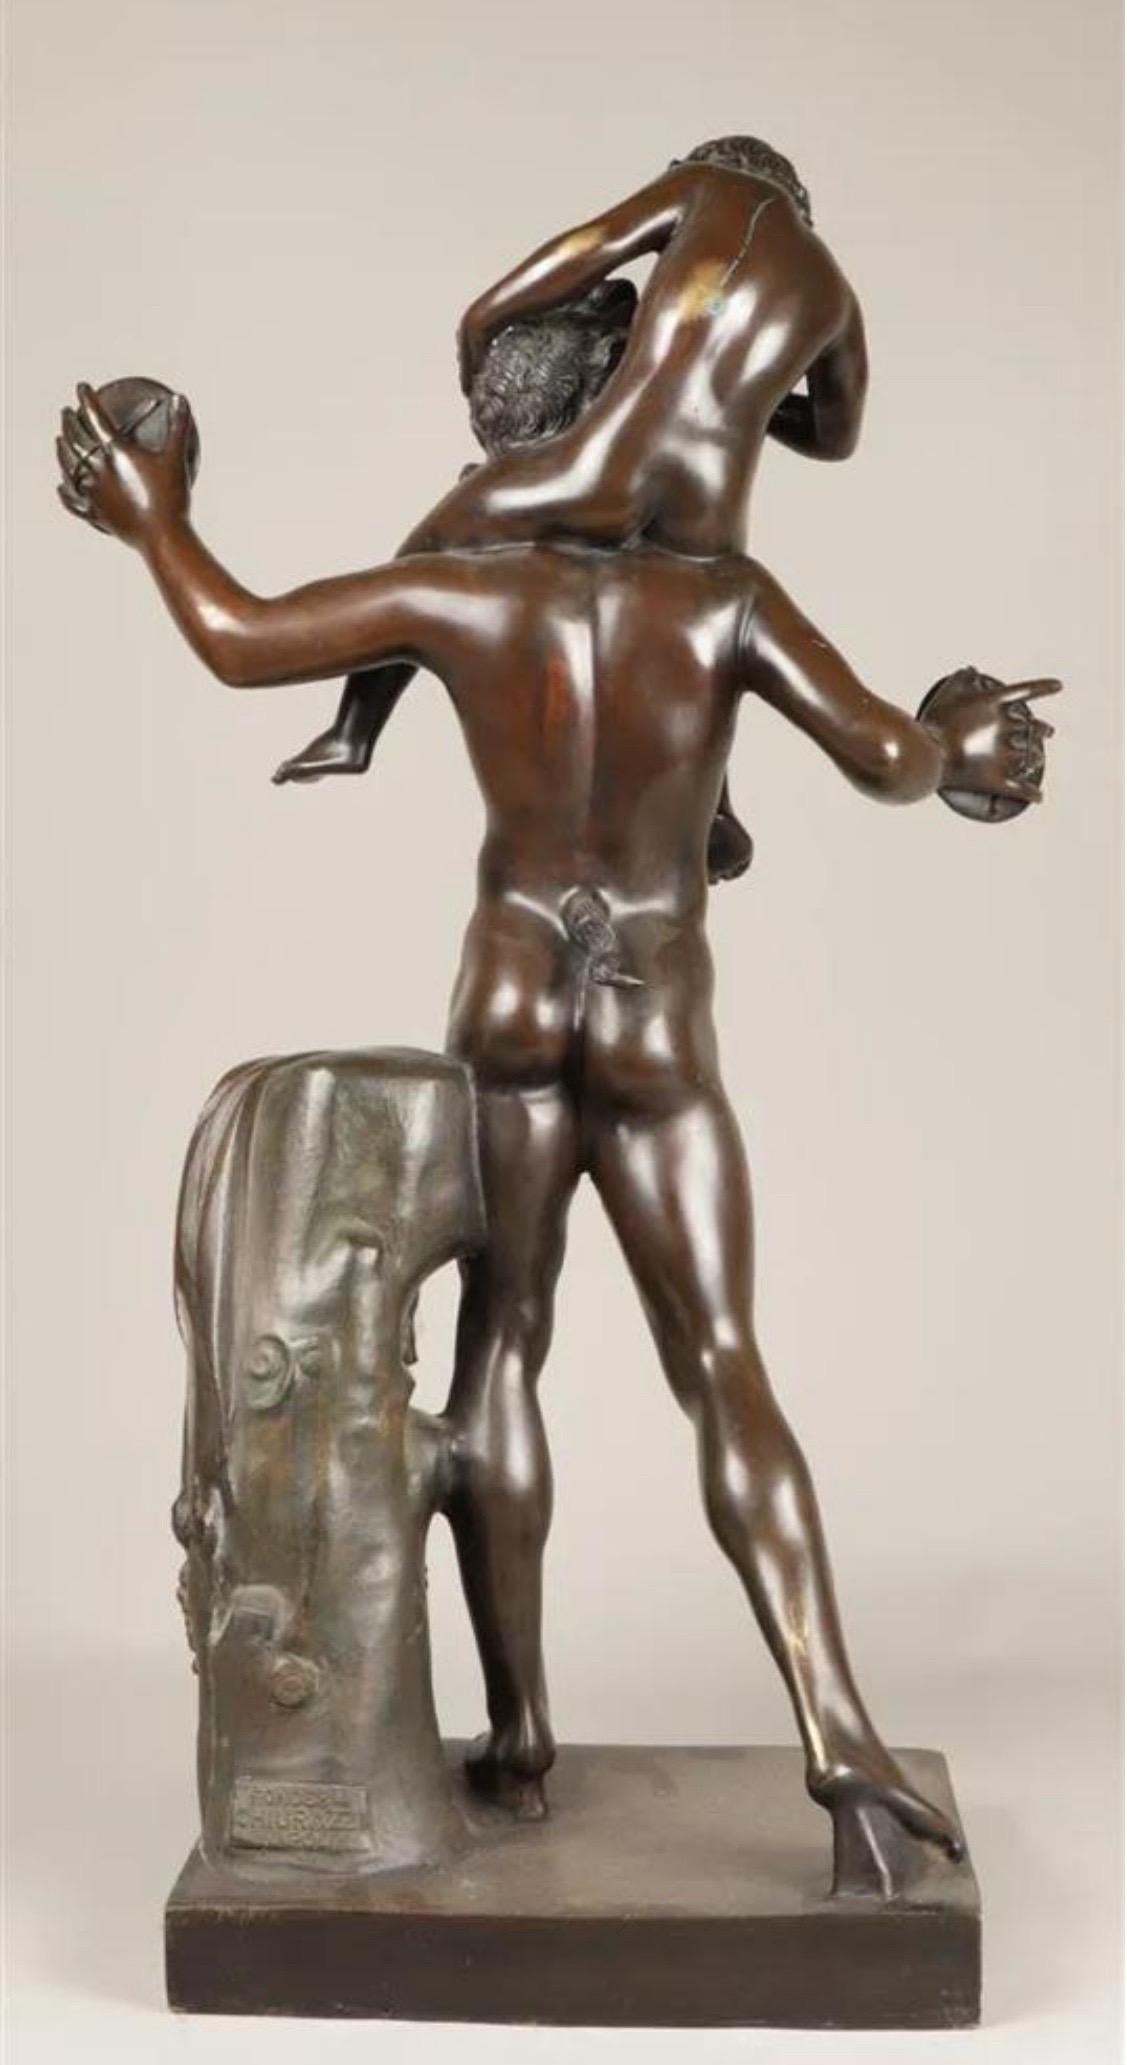 Magnificent bronze representing Satyr with the child Dionysos, signed Fonderie Chiurazzi Naples. Height: 71cm.